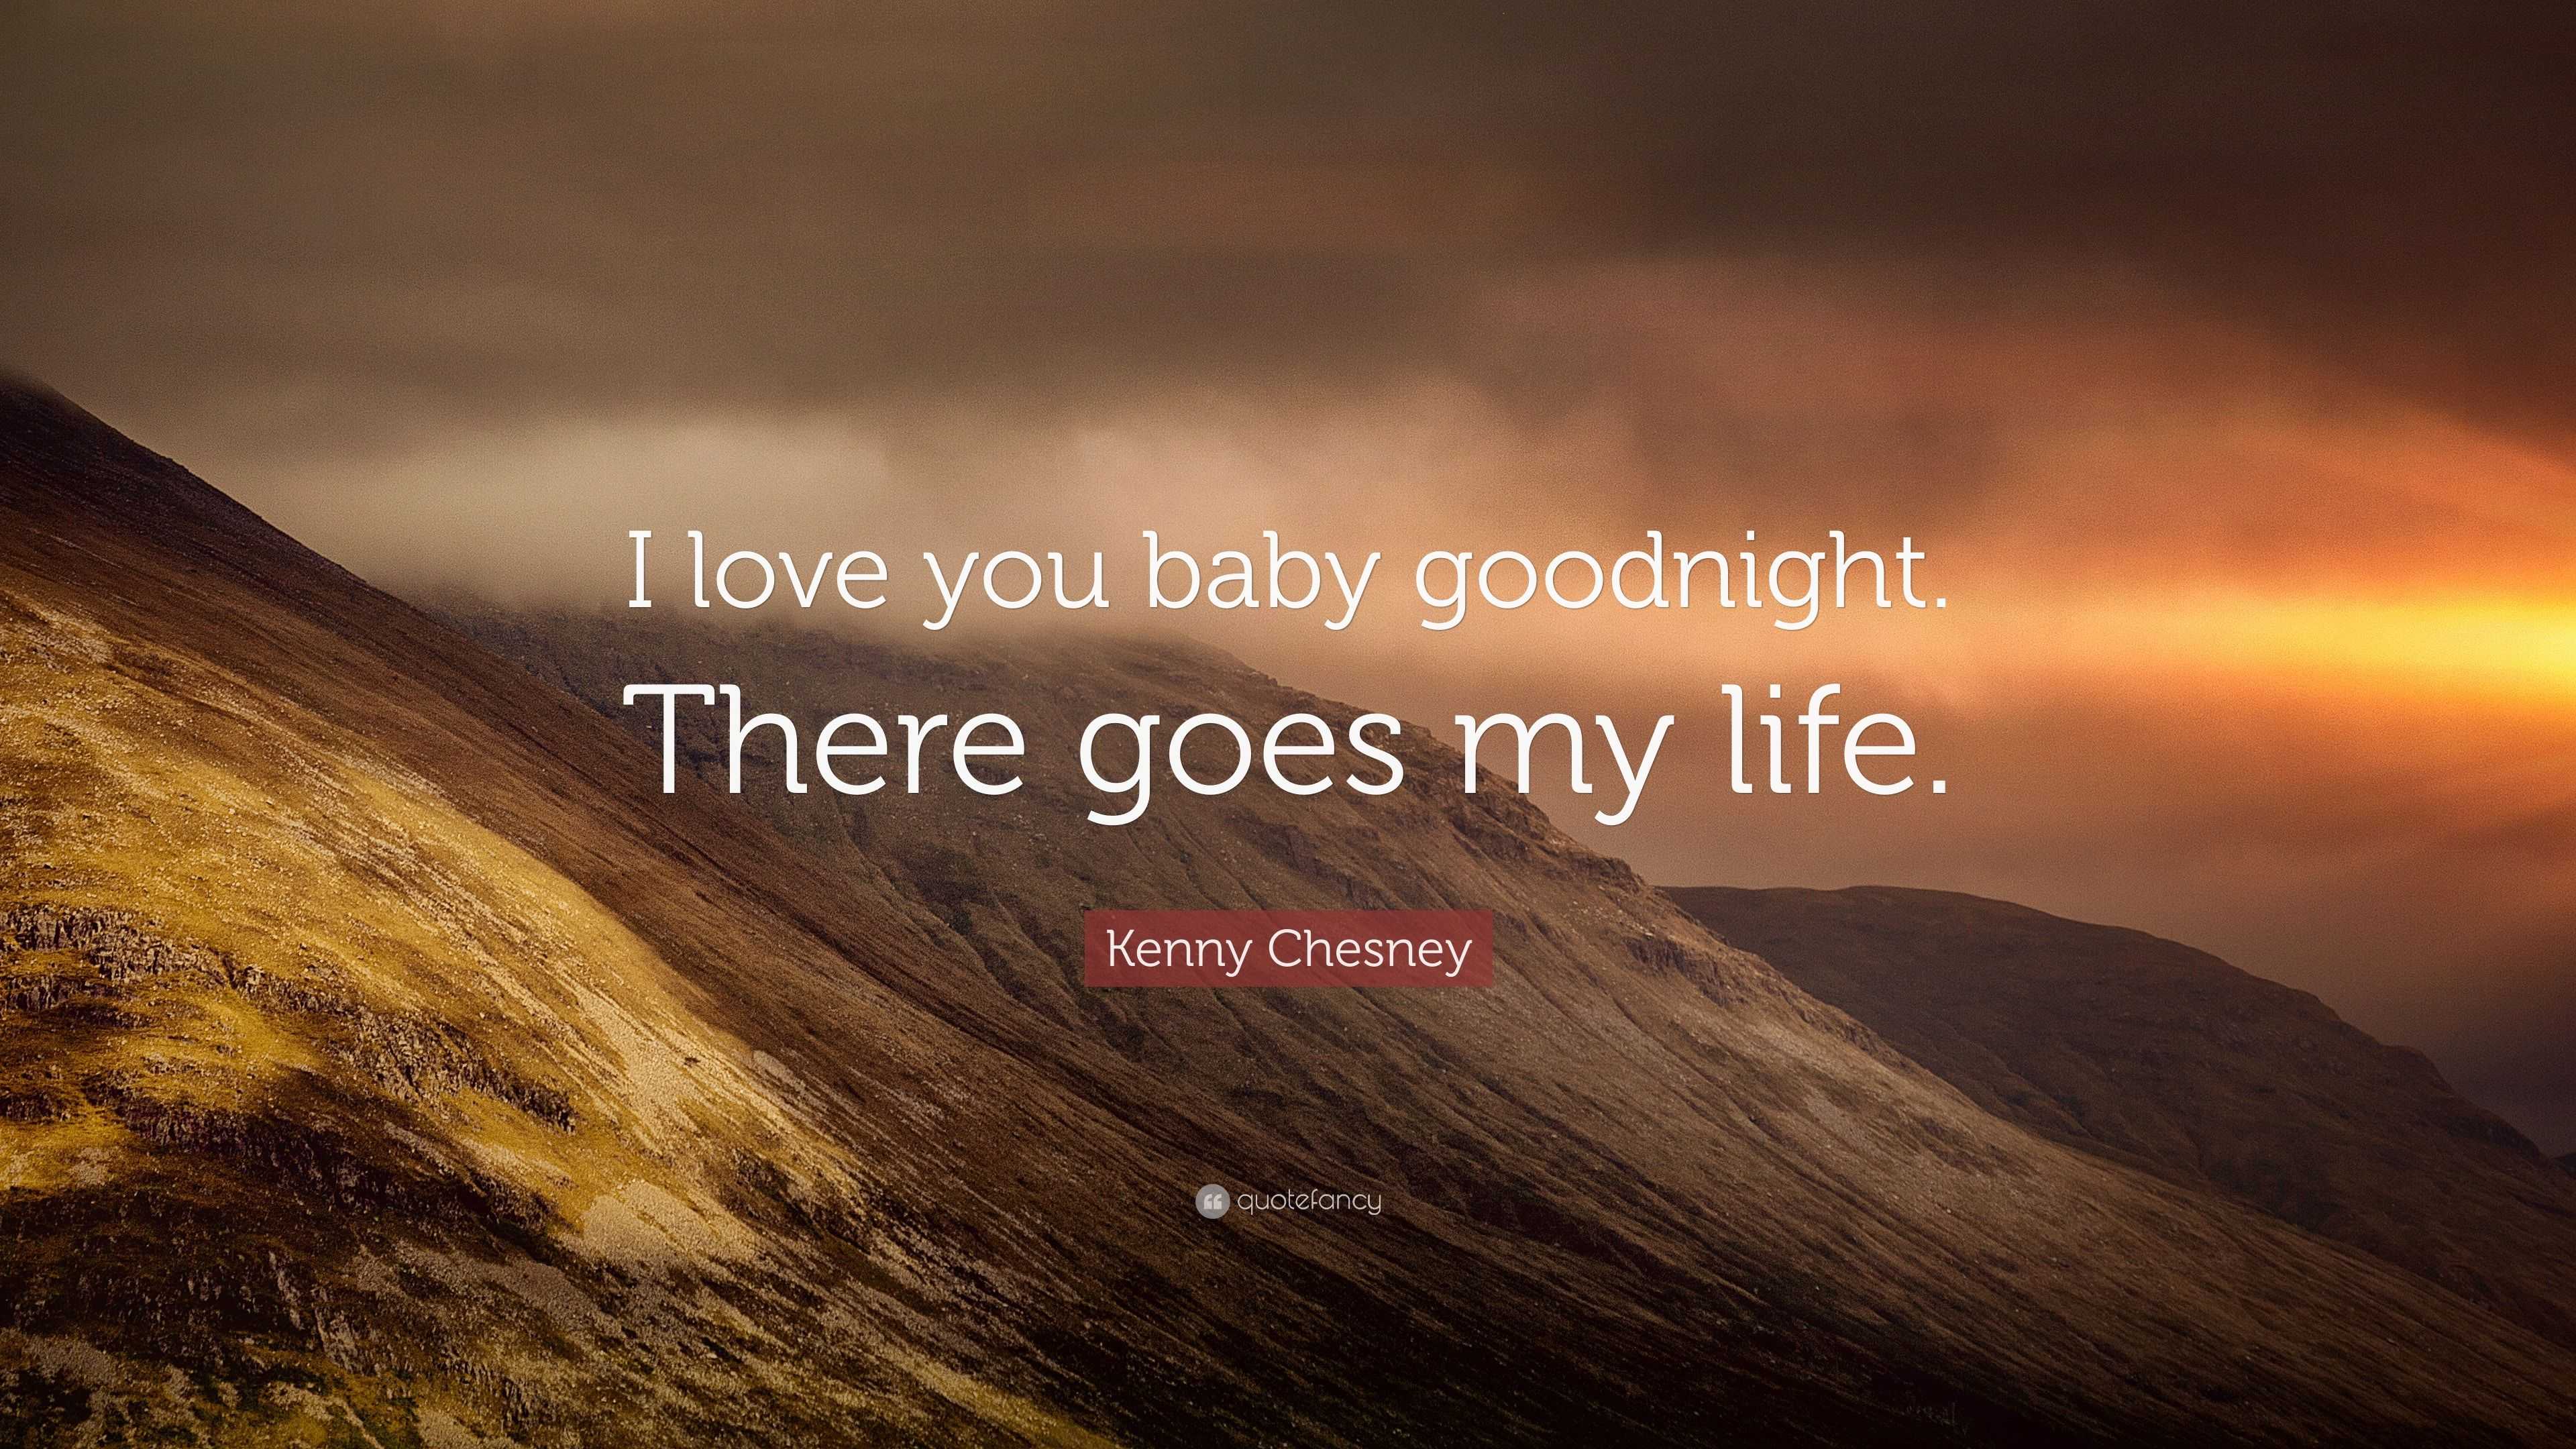 Kenny Chesney Quote: “I love you baby goodnight. There goes my life.”